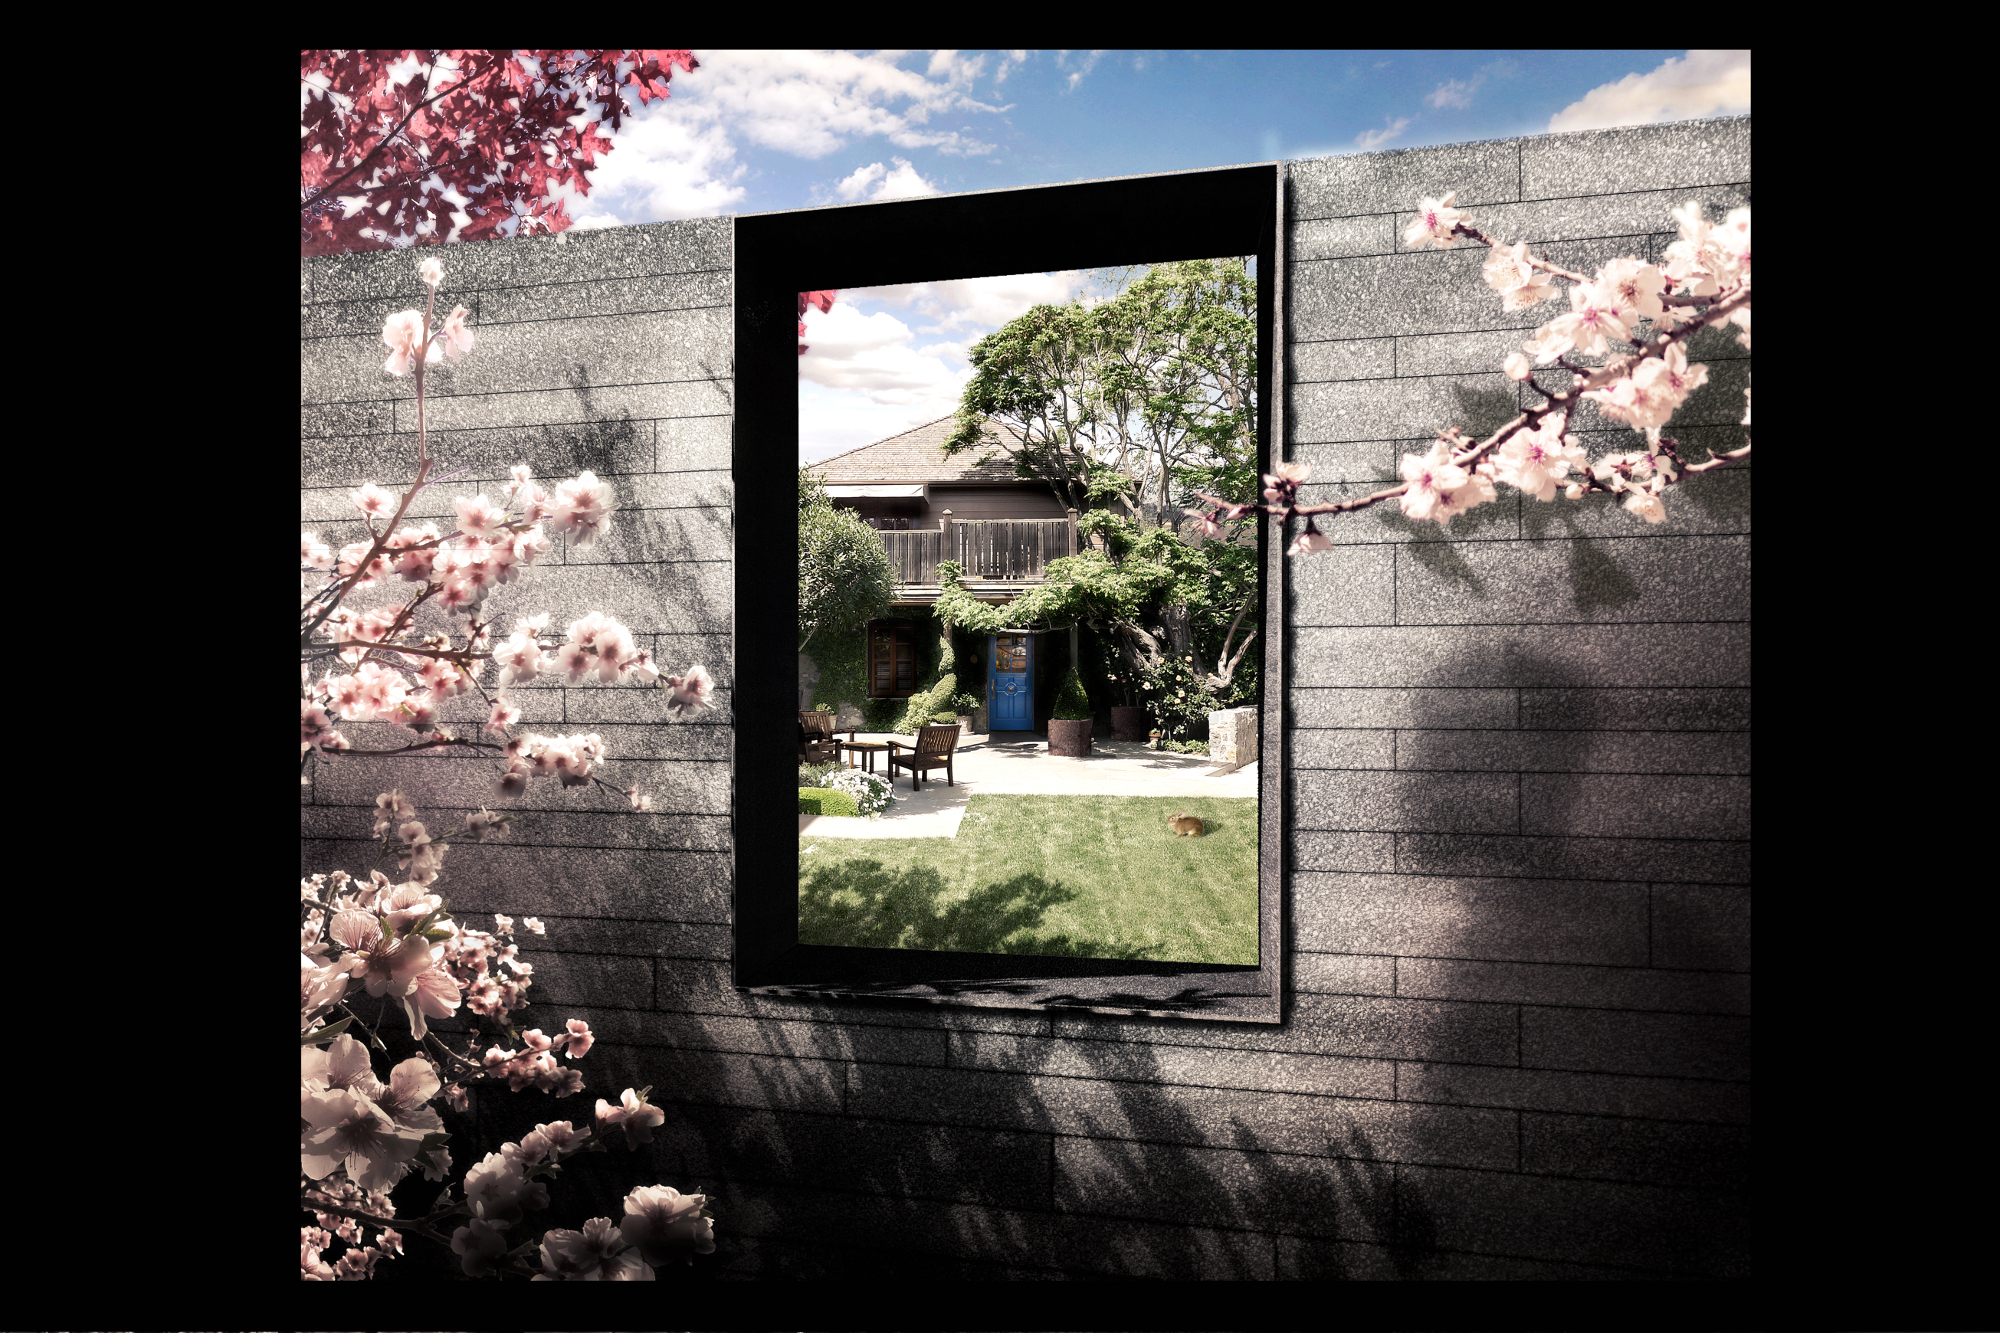 Arriving at The French Laundry’s courtyard, guests will be greeted by the scent of California almond blossoms. Rendering: Snøhetta